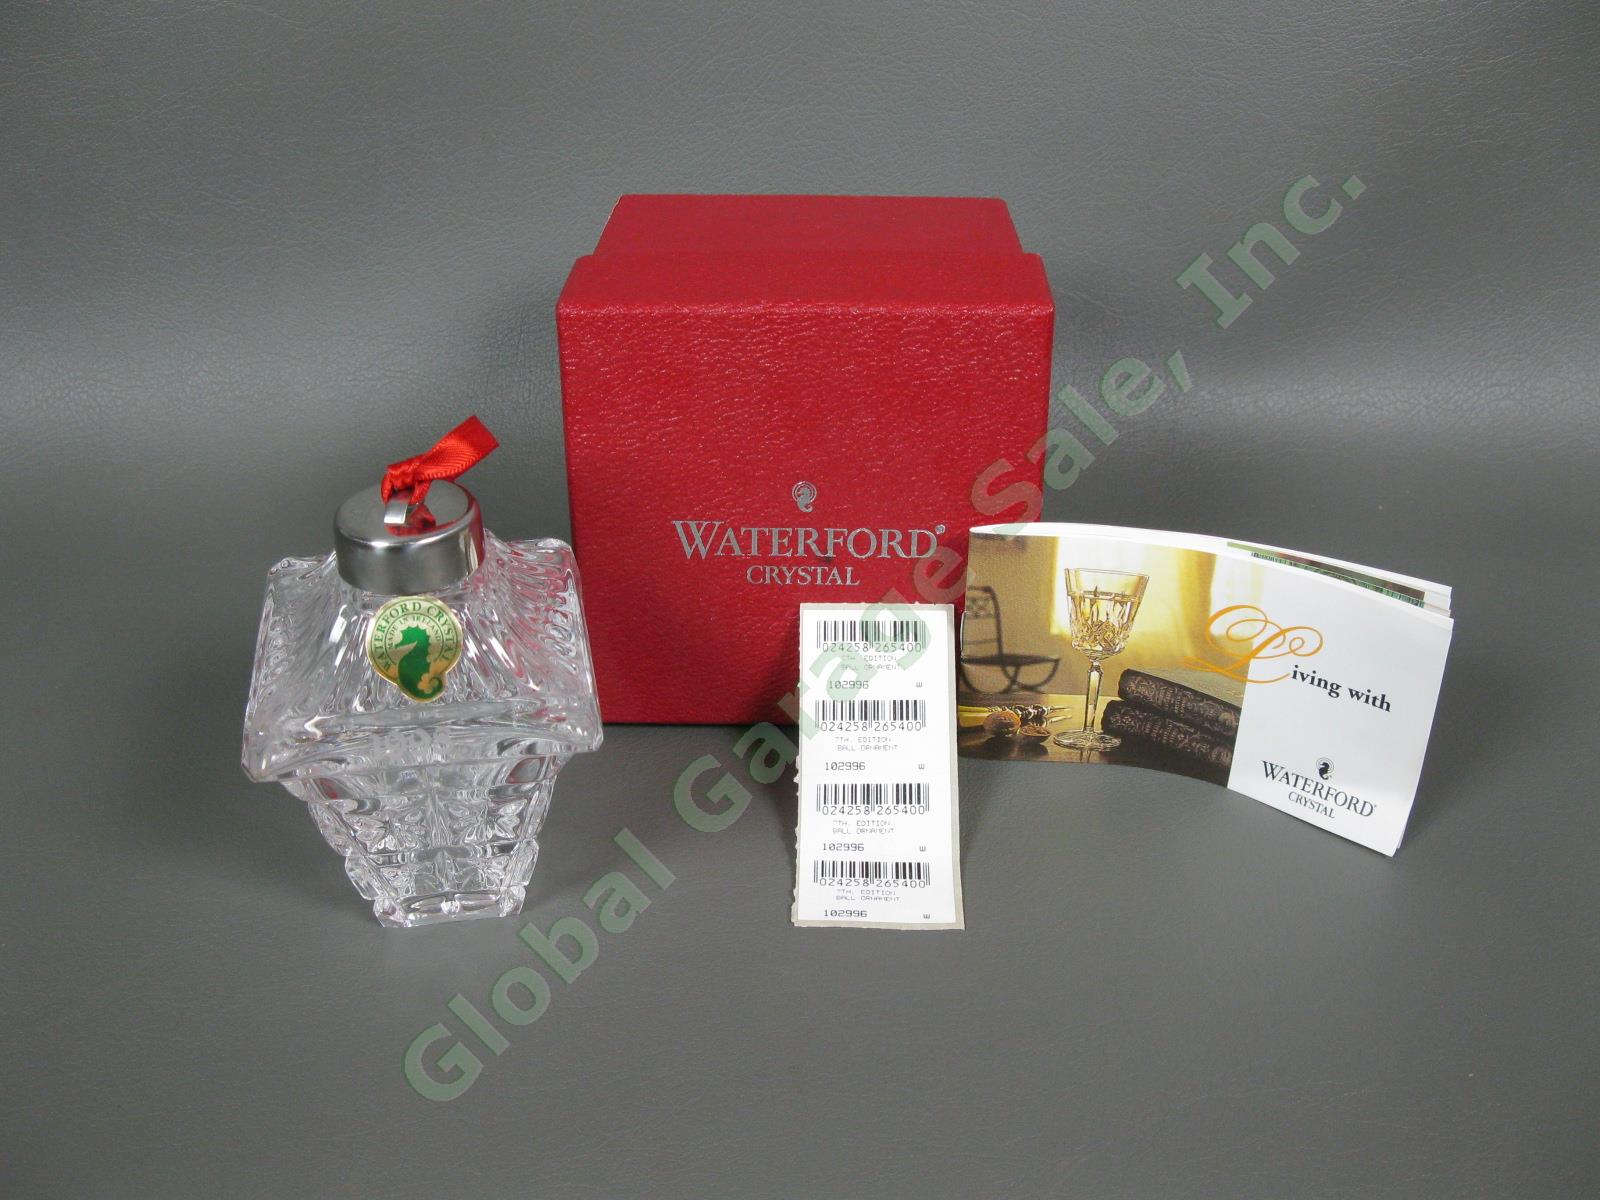 1998 Waterford Crystal Annual Christmas Ball Ornament 7th Edition MINT in Box